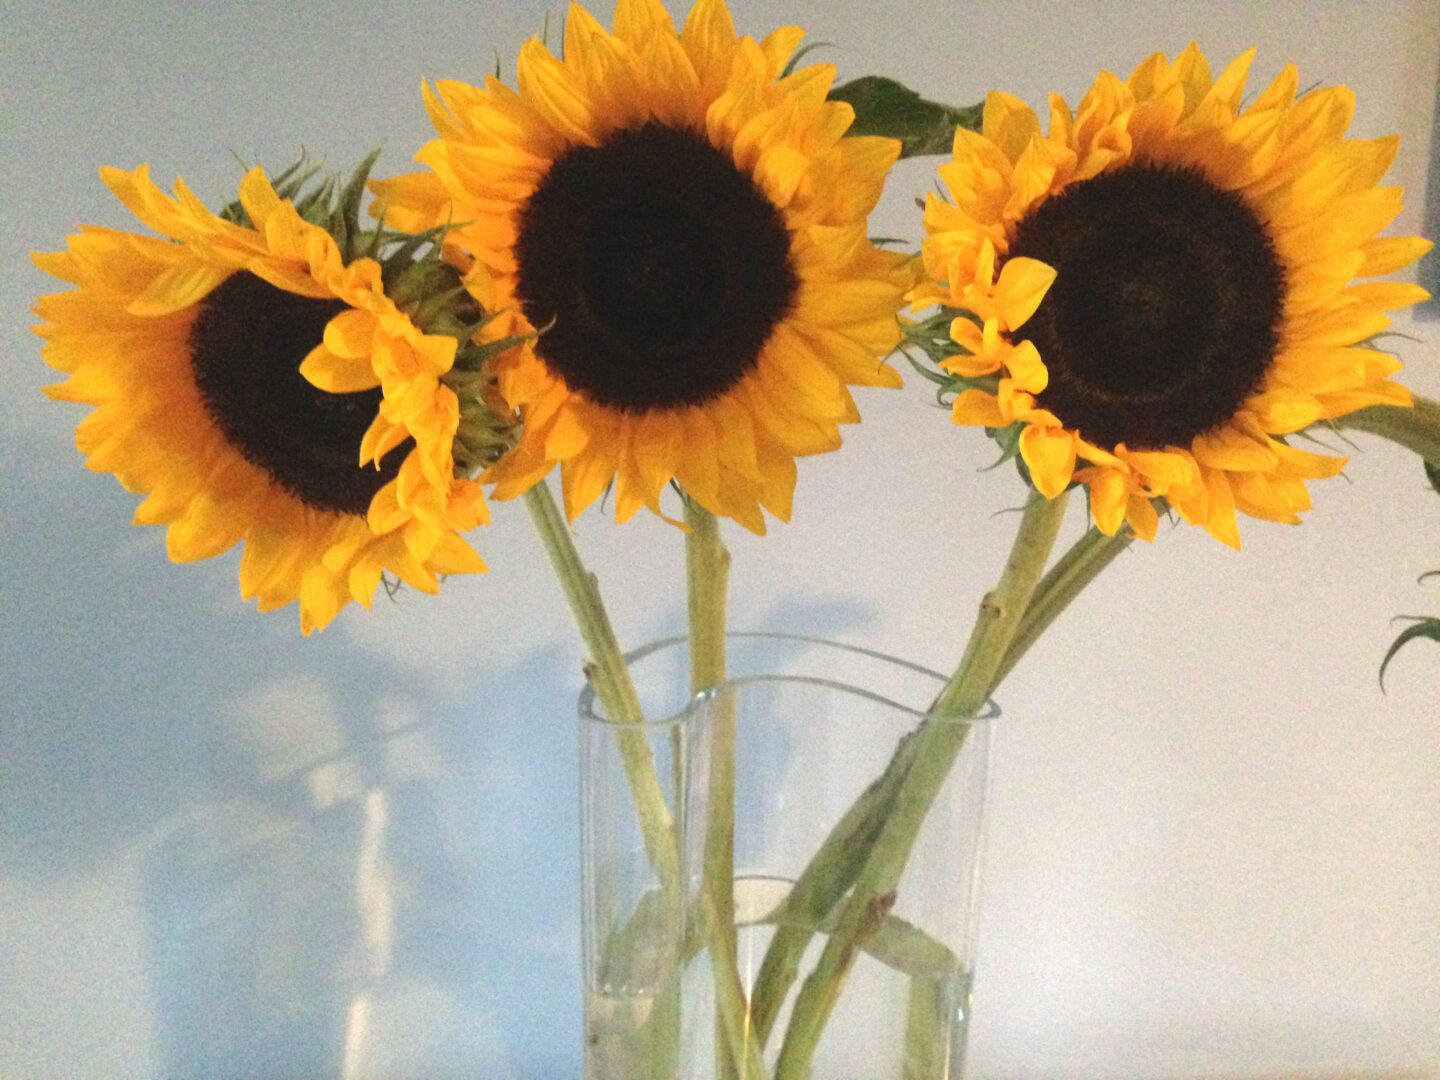 Happy days: Sunflowers and coffee dates